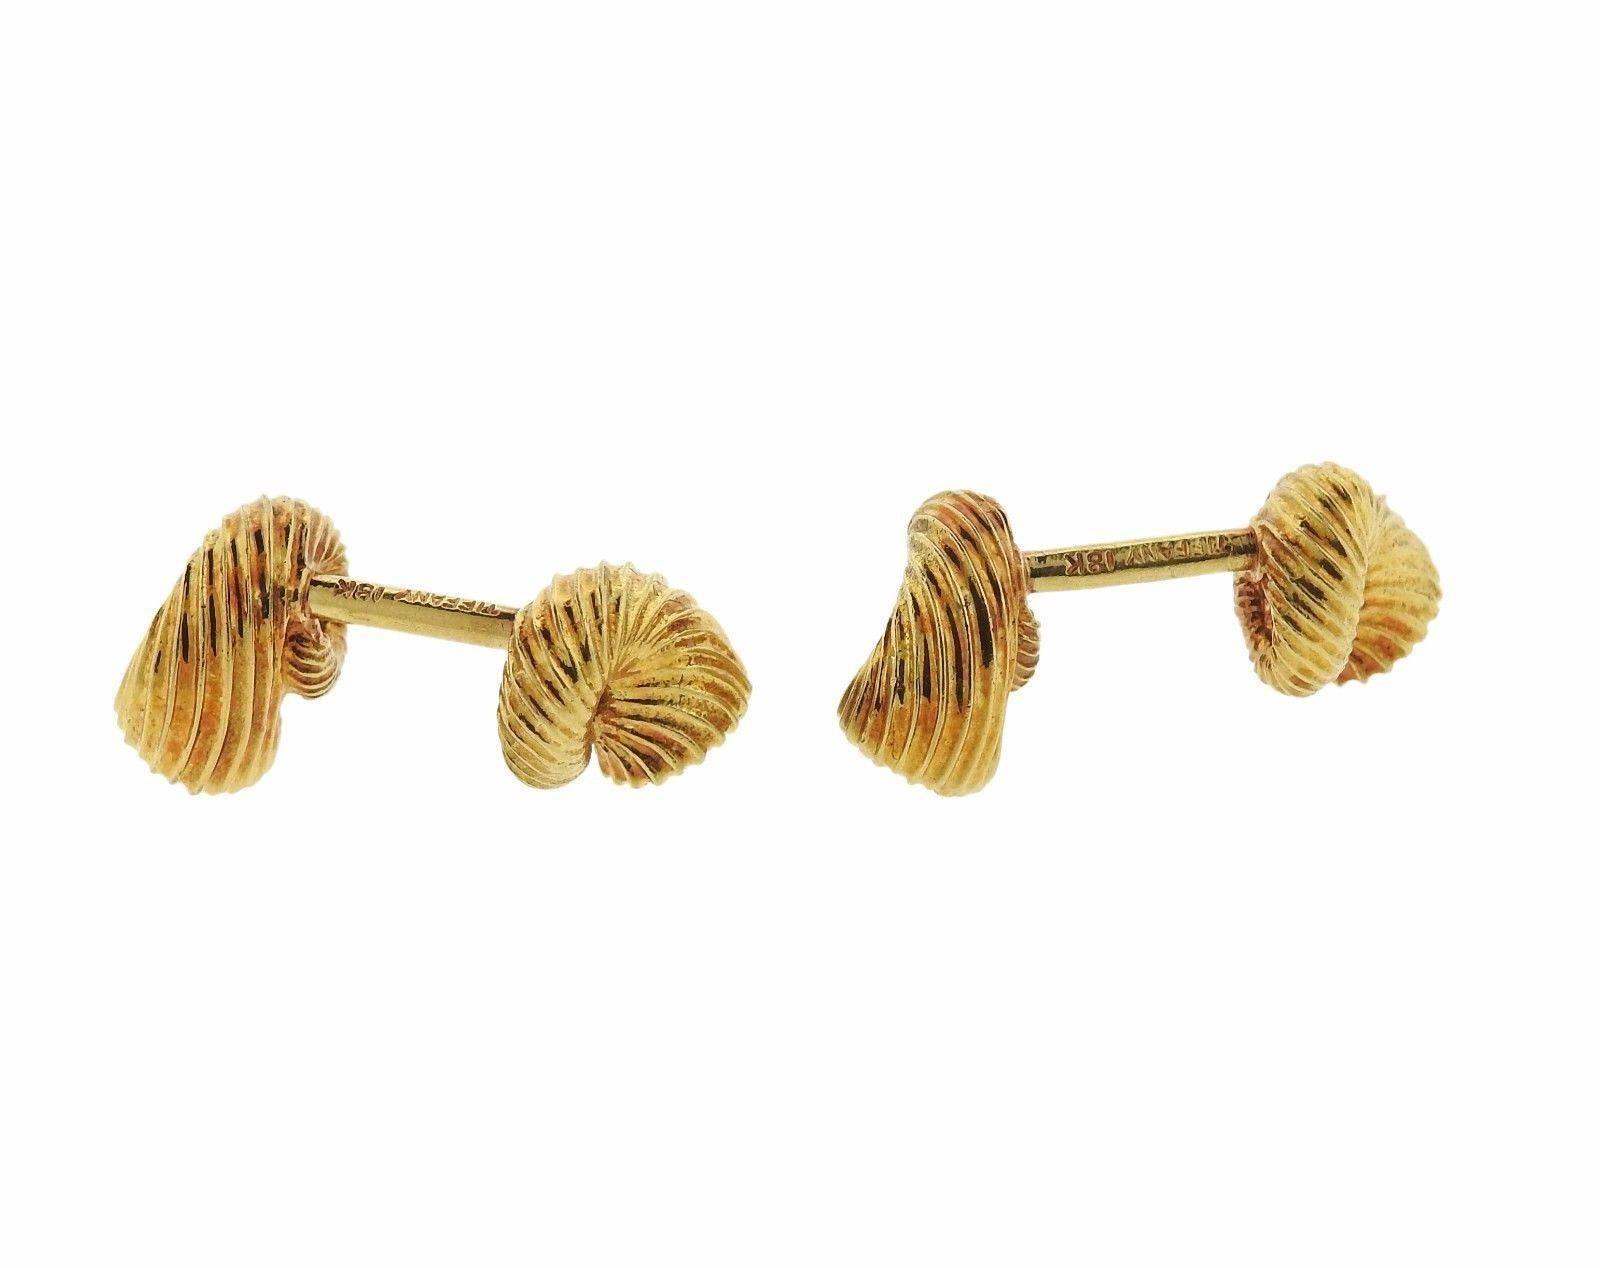 A pair of 18k yellow gold cufflinks set with approximately 0.32ctw of G/VS diamonds.  The cufflinks measure 12mm x 8mm and weigh 17.1 grams.  Marked: Schlumberger, Tiffany, 18k.  The weight of the pair is 17.1 grams.